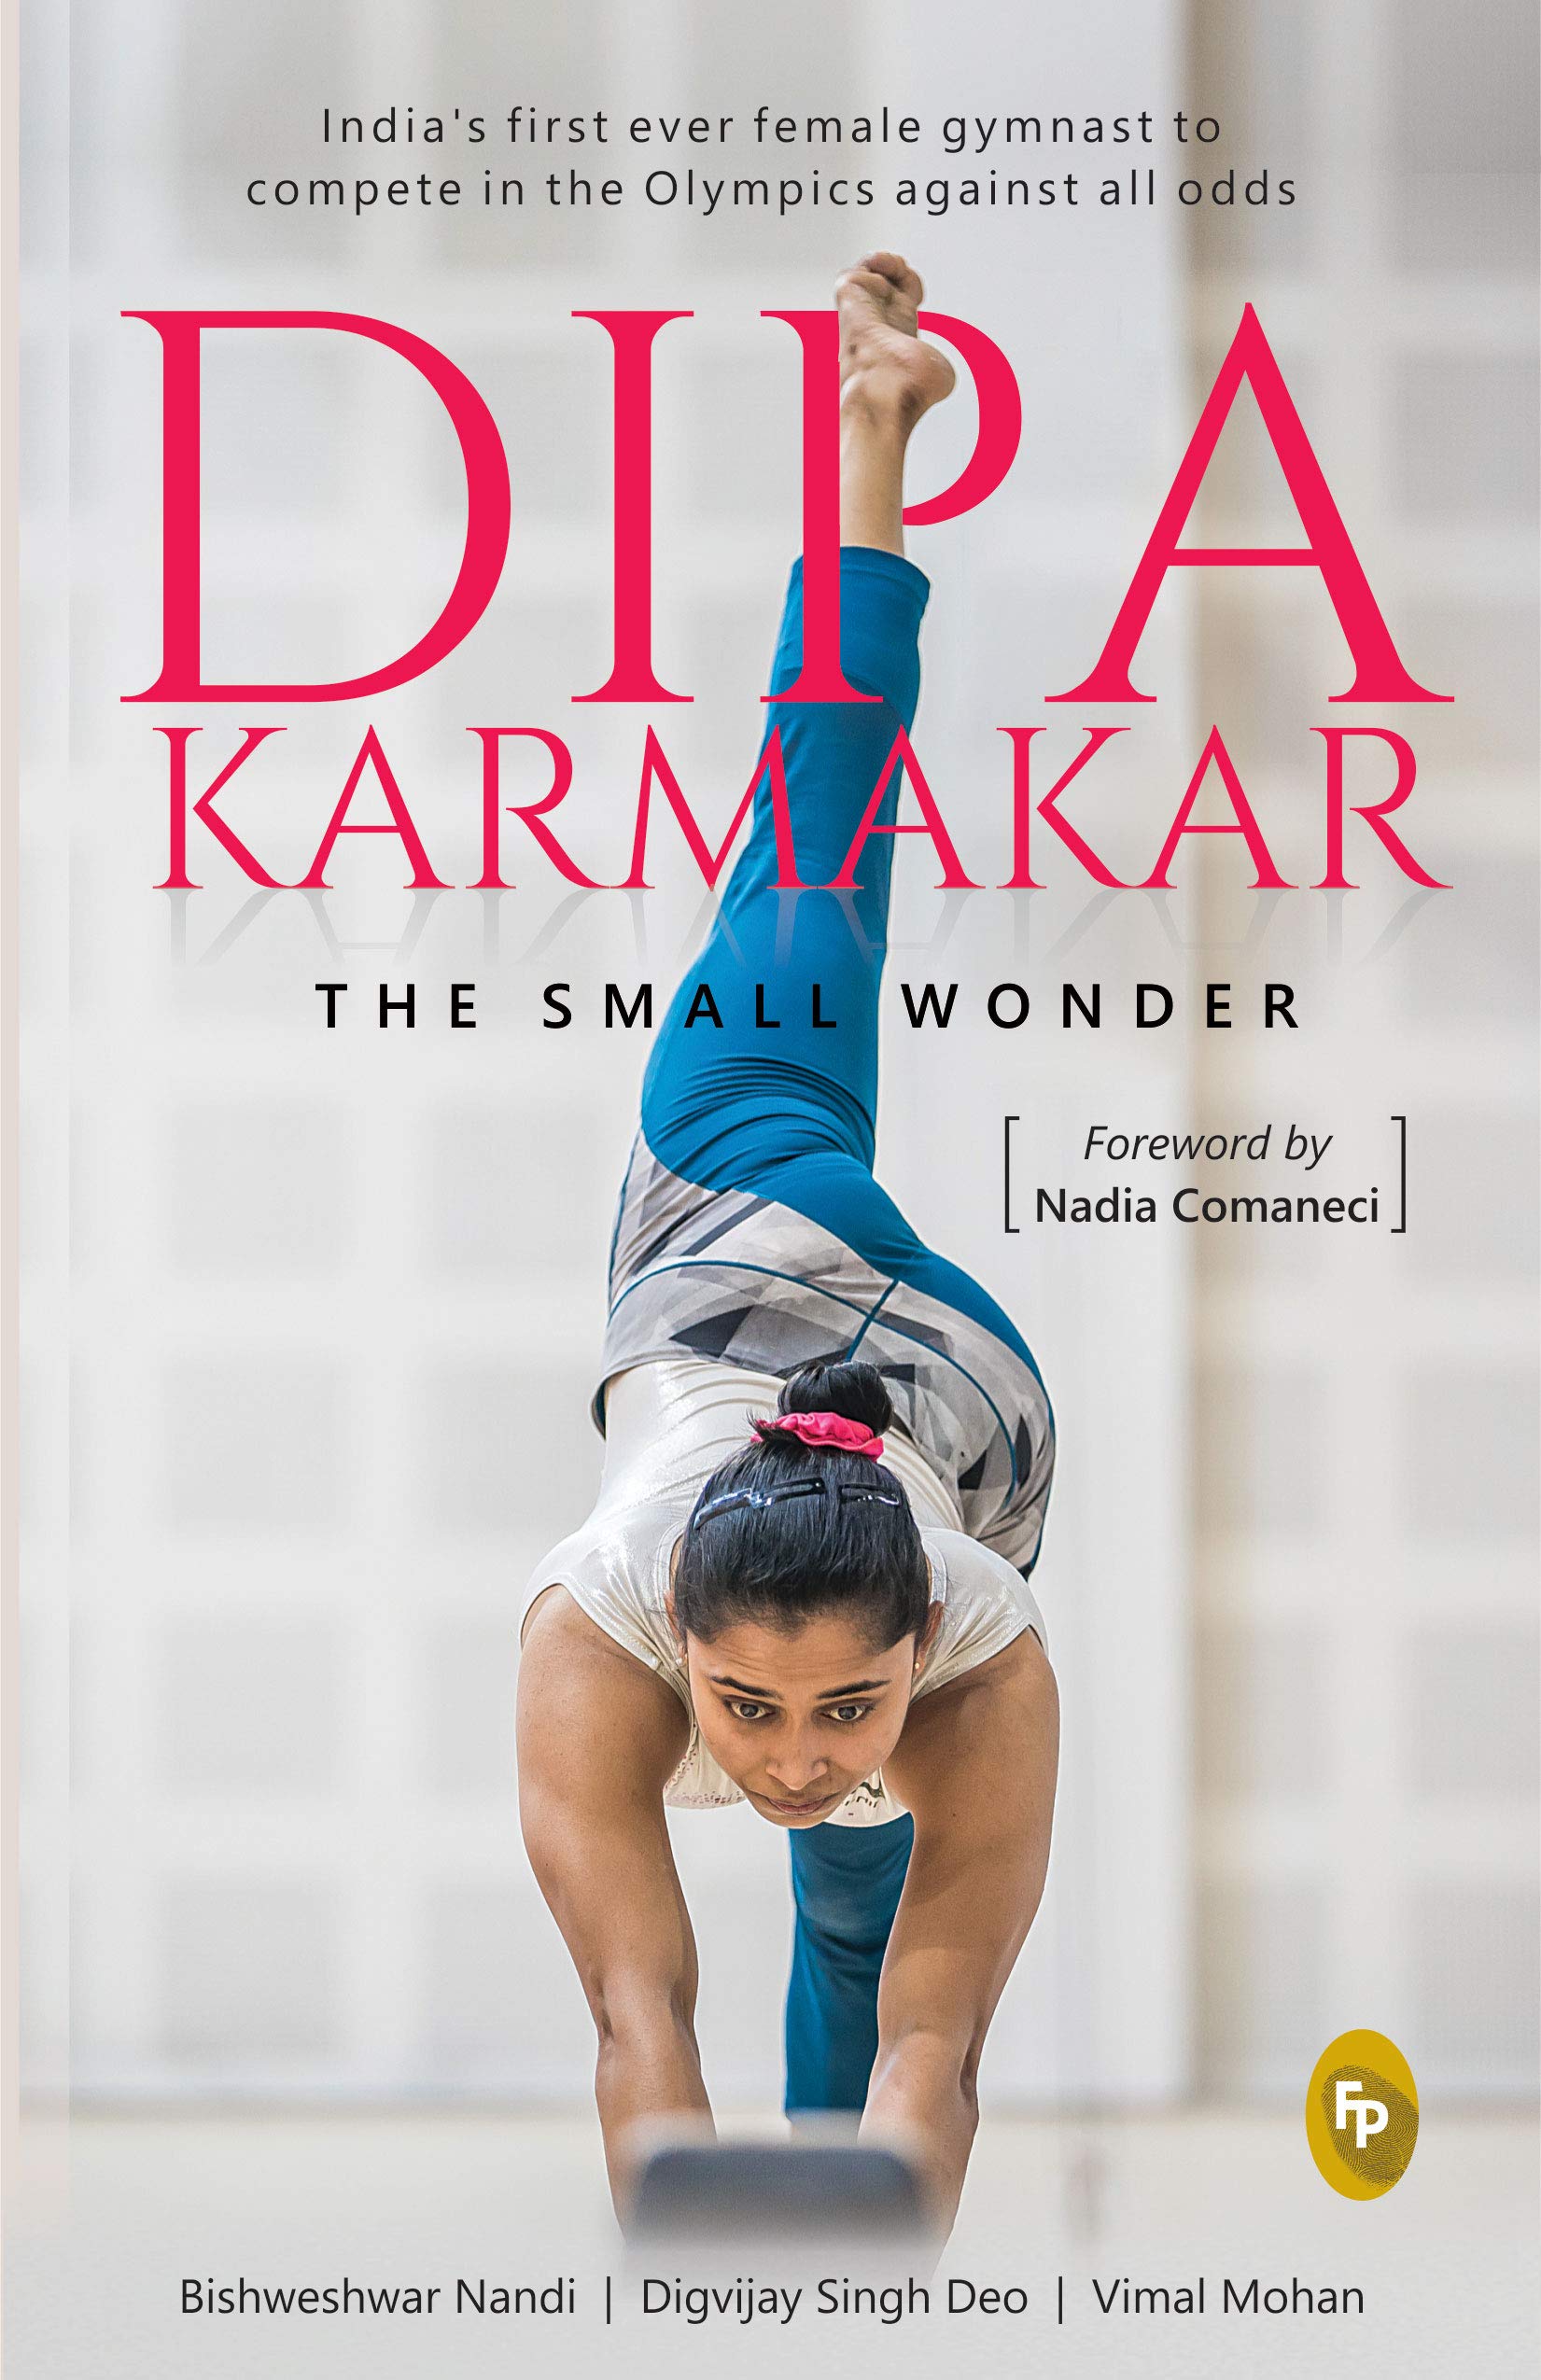 Dipa Karmakar The Small Wonder (India's First Ever Female Gymnast to Compete in the Olympics)-CLASSIBLOGGER